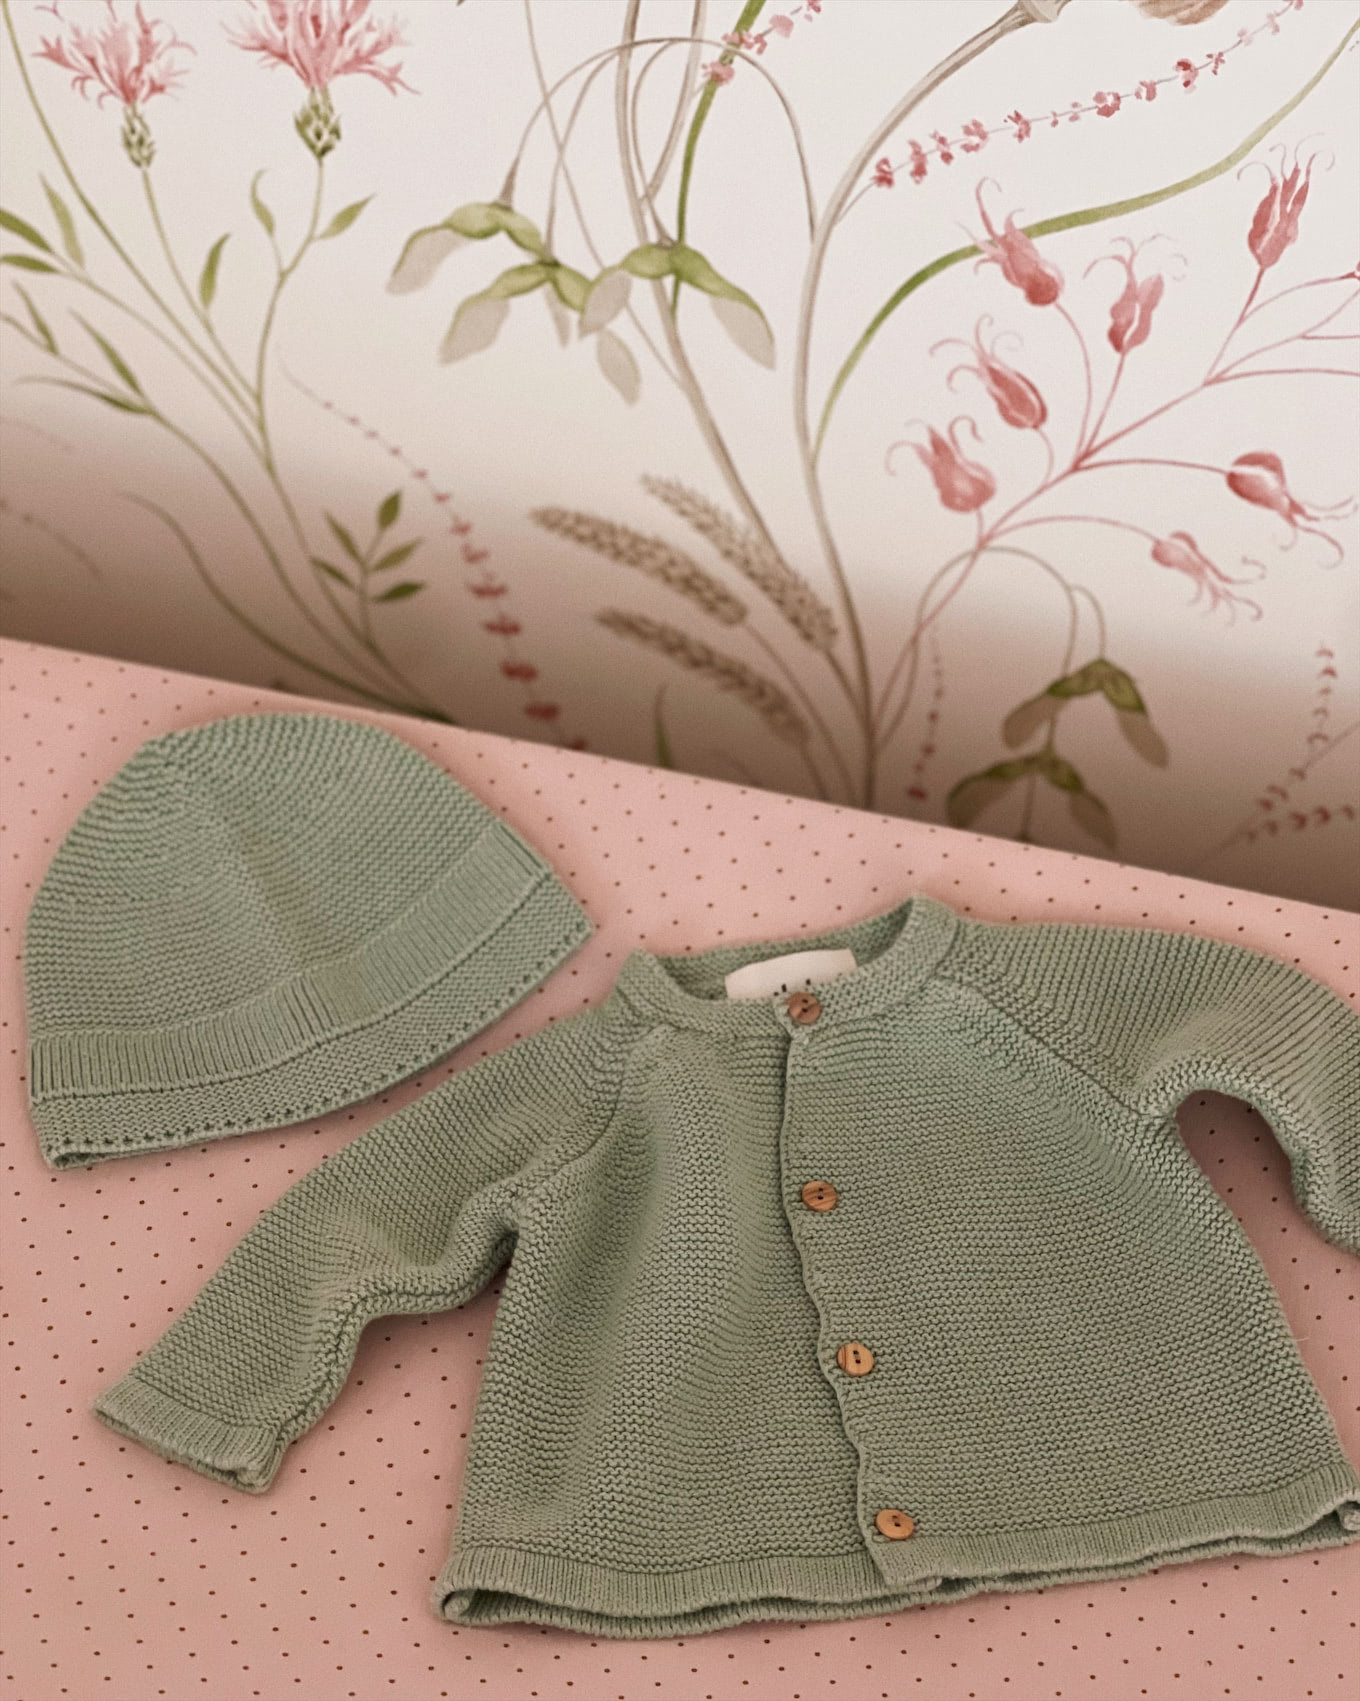 green knit baby shirt and hat